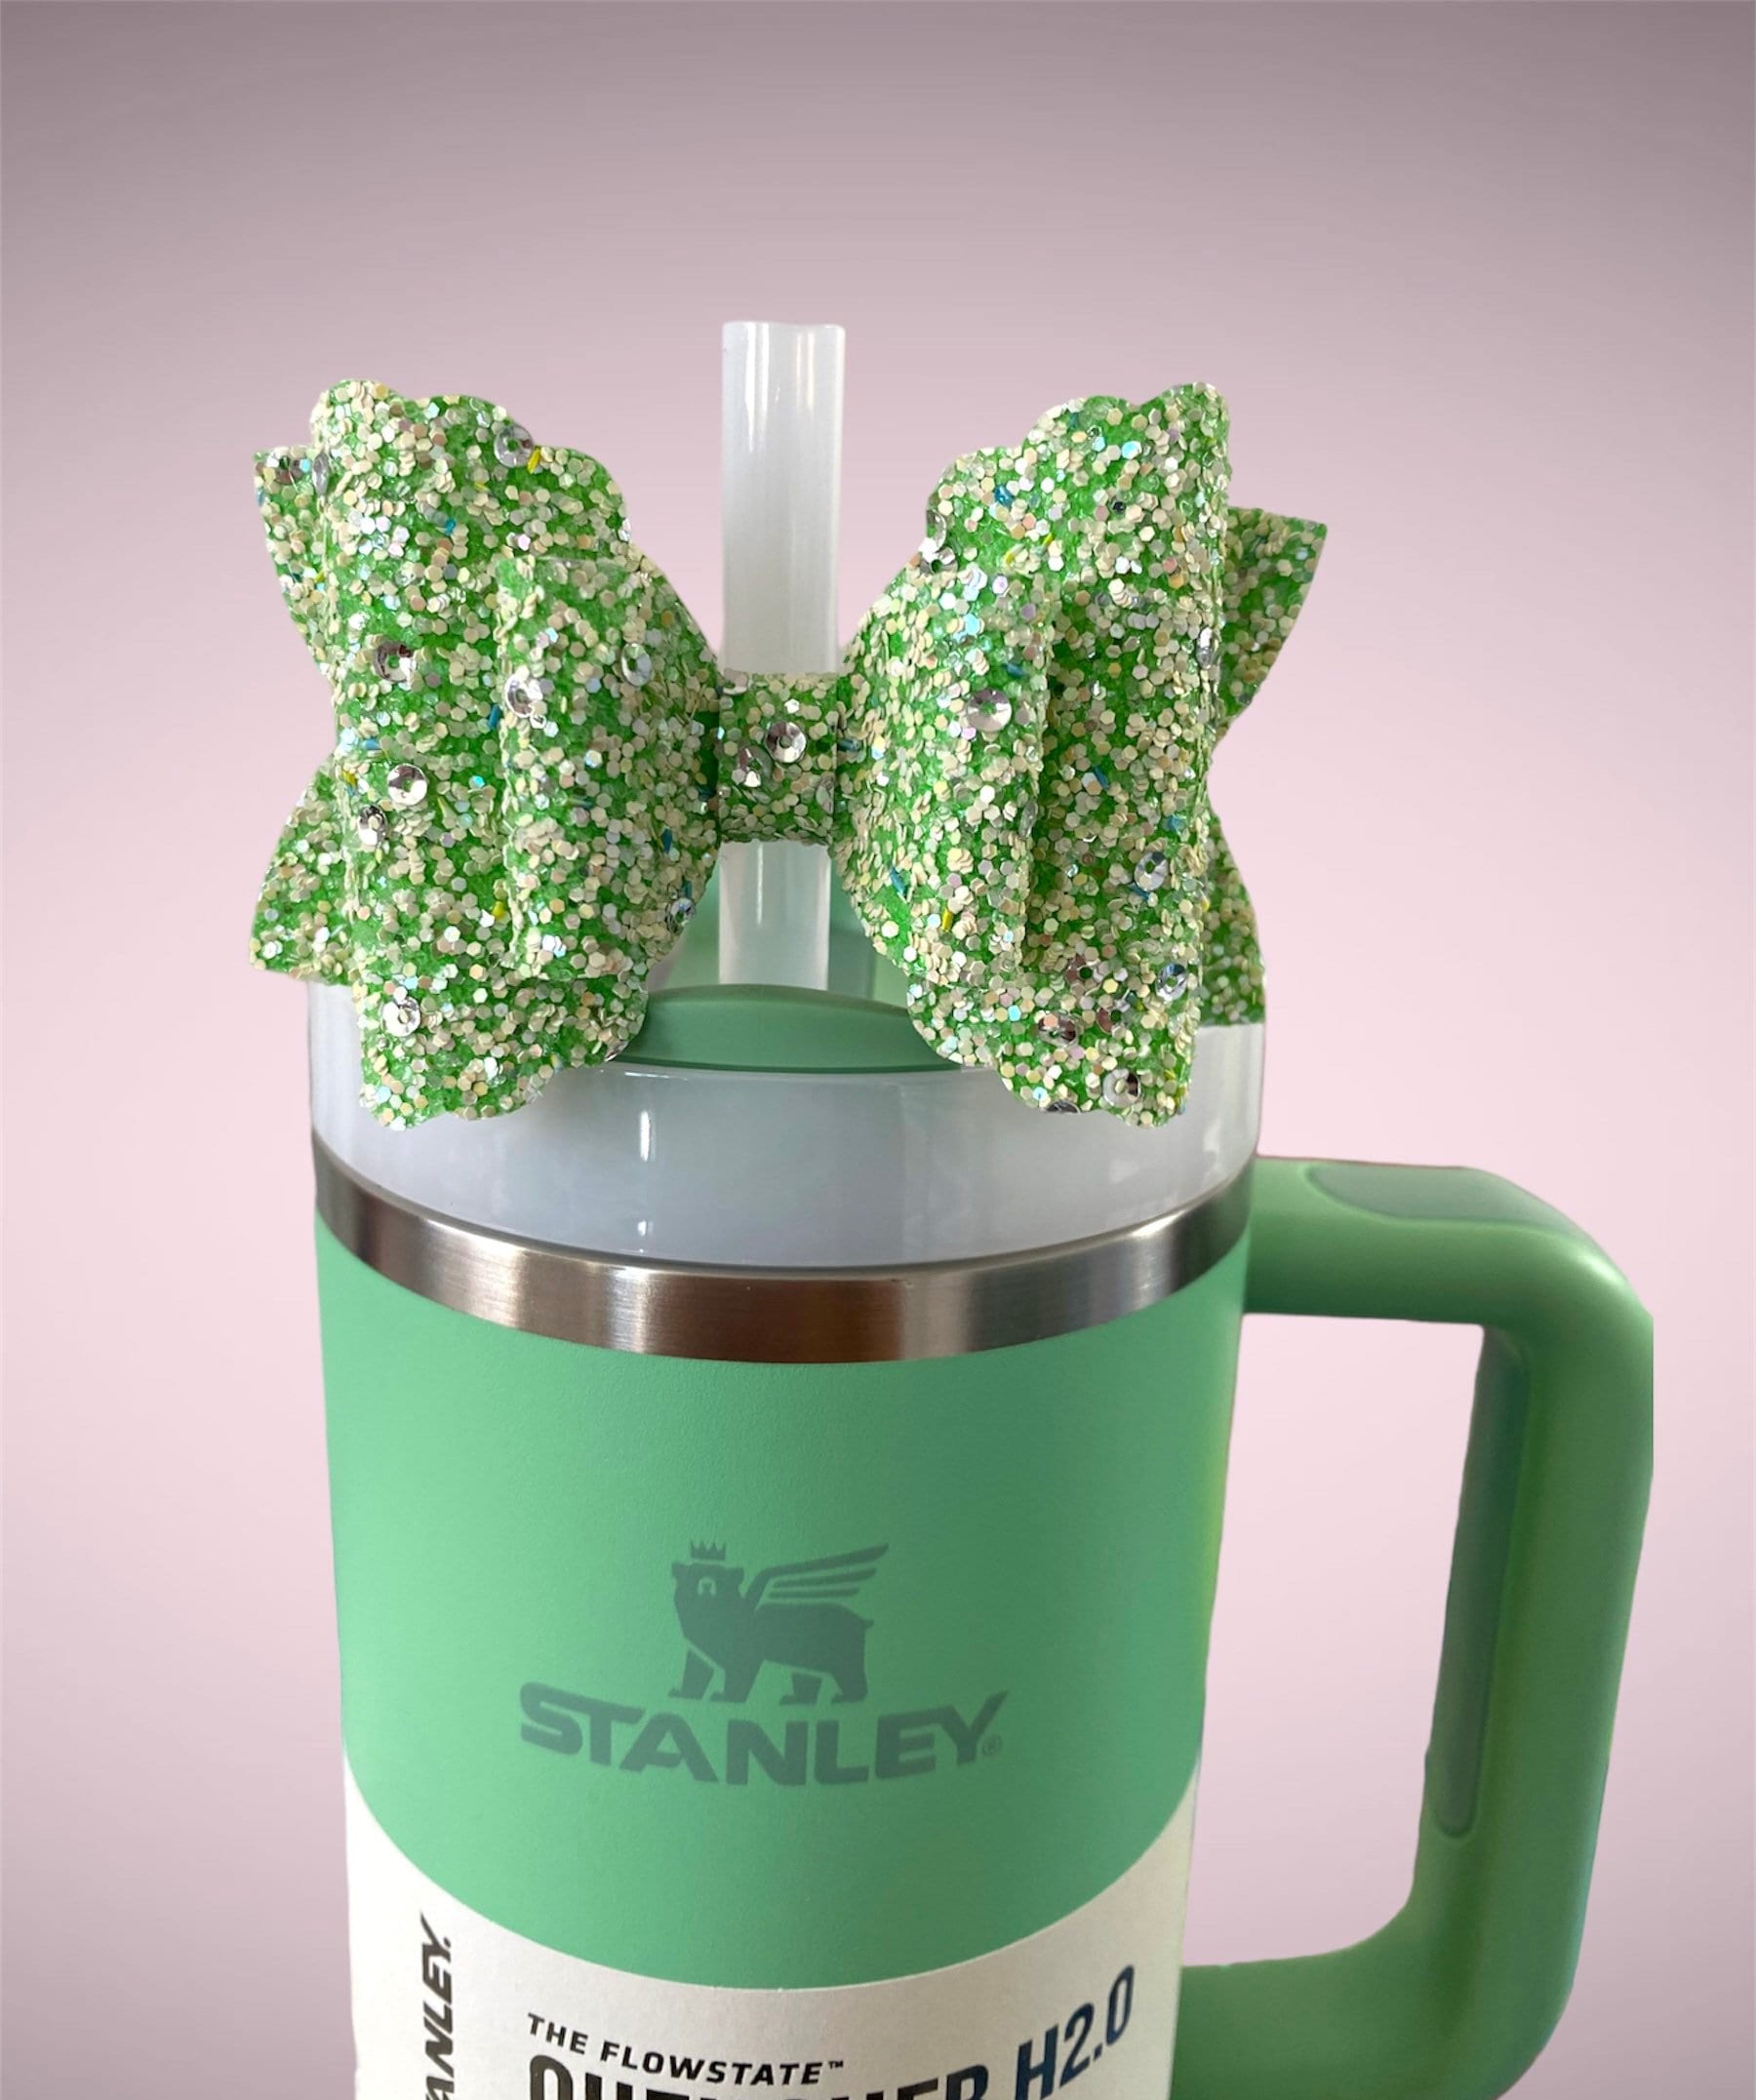 Straw Topper Stanley, Pink Straw Bow Topper, Bow Straw Topper, Bow for  Stanley Cups, Starbucks Straw Topper, Starbucks Straw Bows